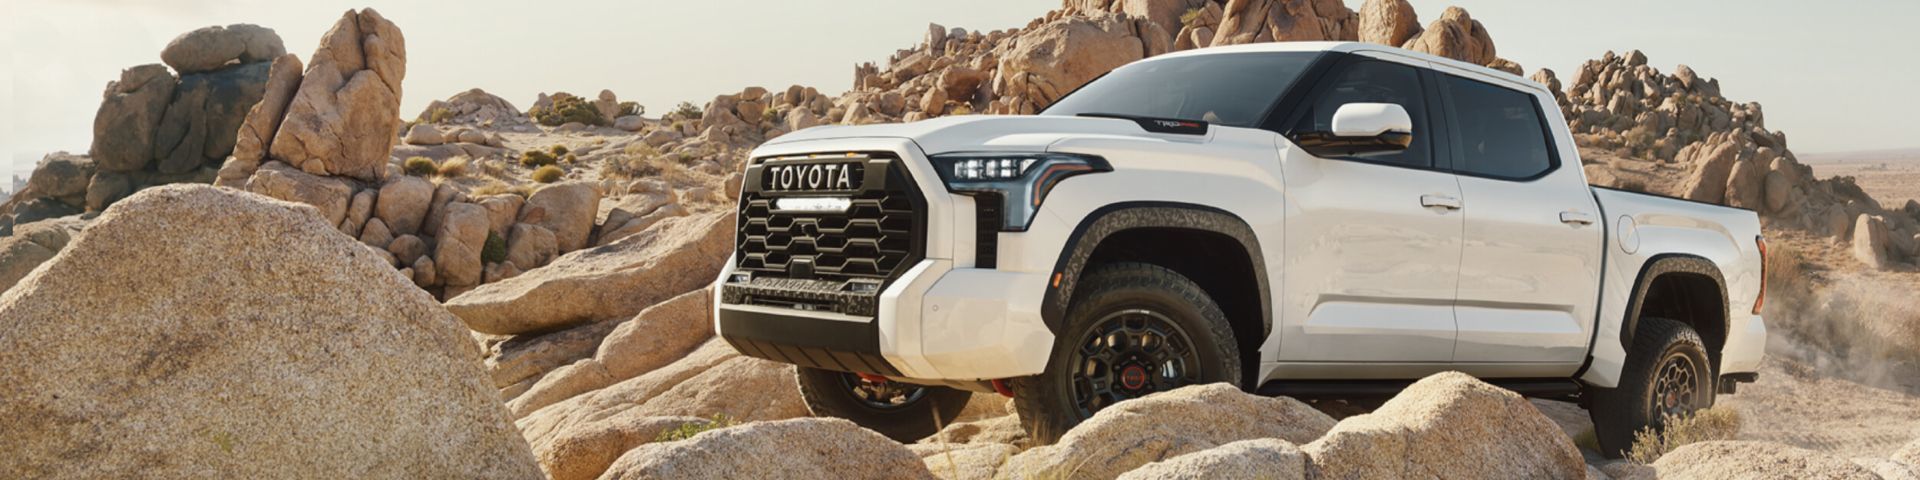 Stronger, Capable, Evolved. The All-New 2022 Toyota Tundra Is Coming To Orangeville Toyota. Register Now For Updates!